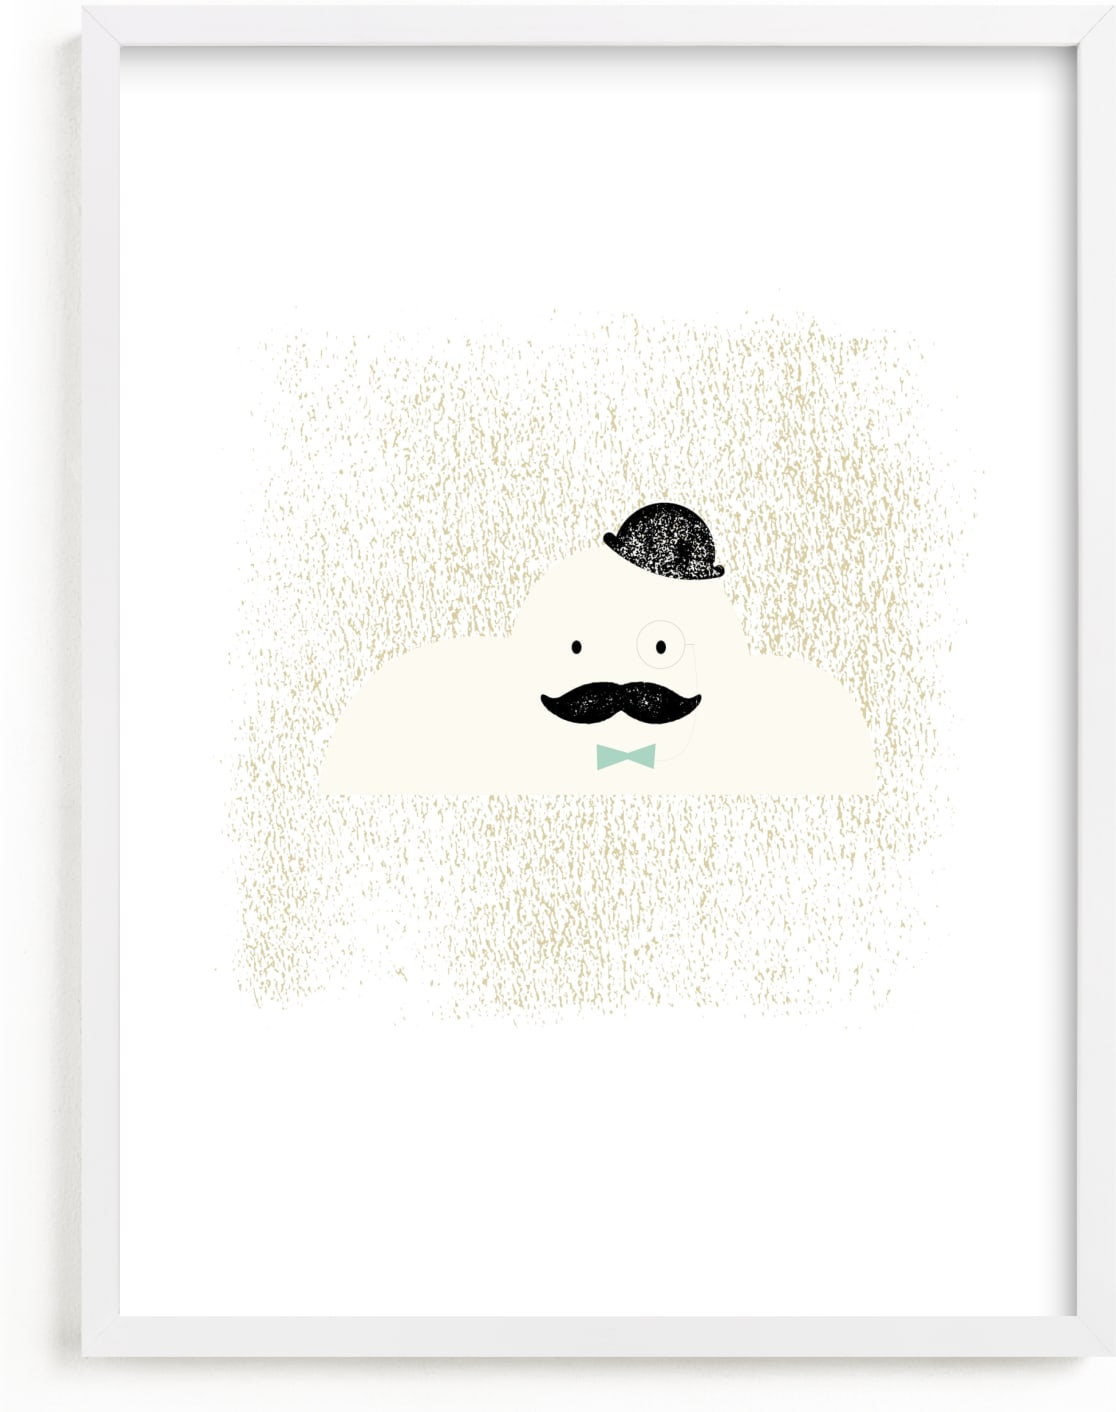 This is a white art by fatfatin called Mr. Cloud.